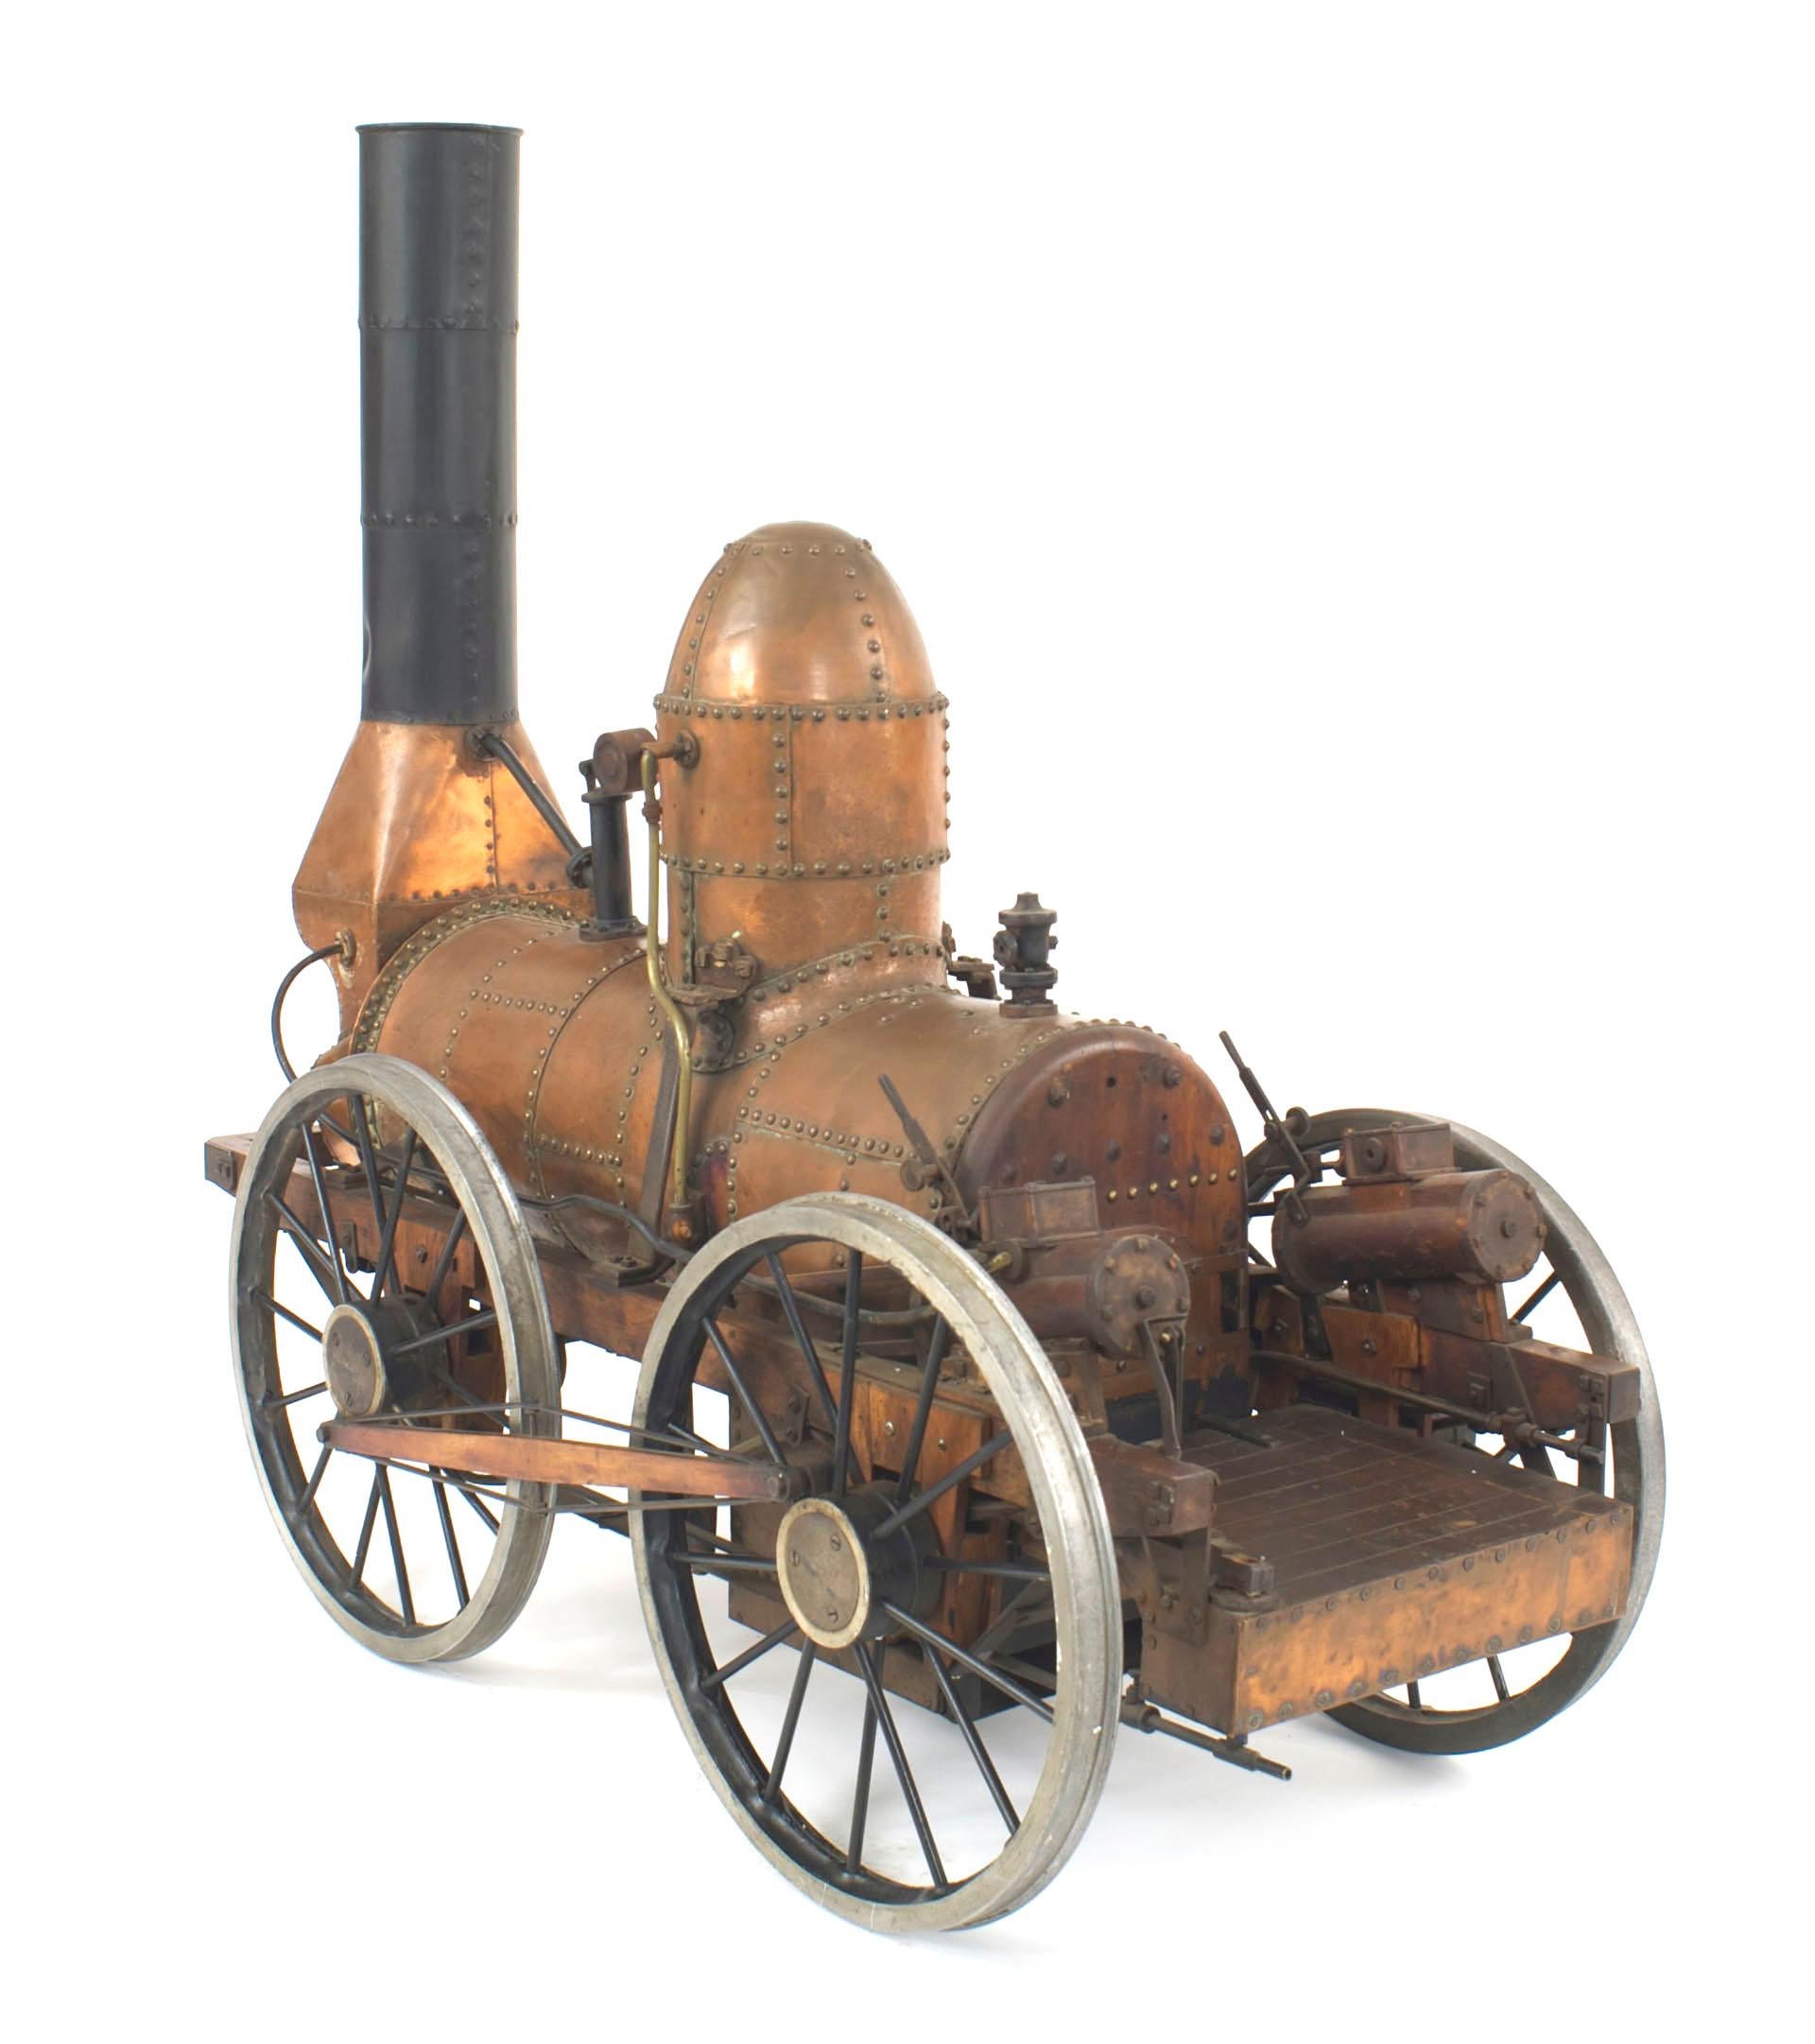 American Country style (20th century) copper train model of Dewitt Clinton train steam engine (Stephenson's Rocket) on tracks (see #049802 for train coach companion piece).
   